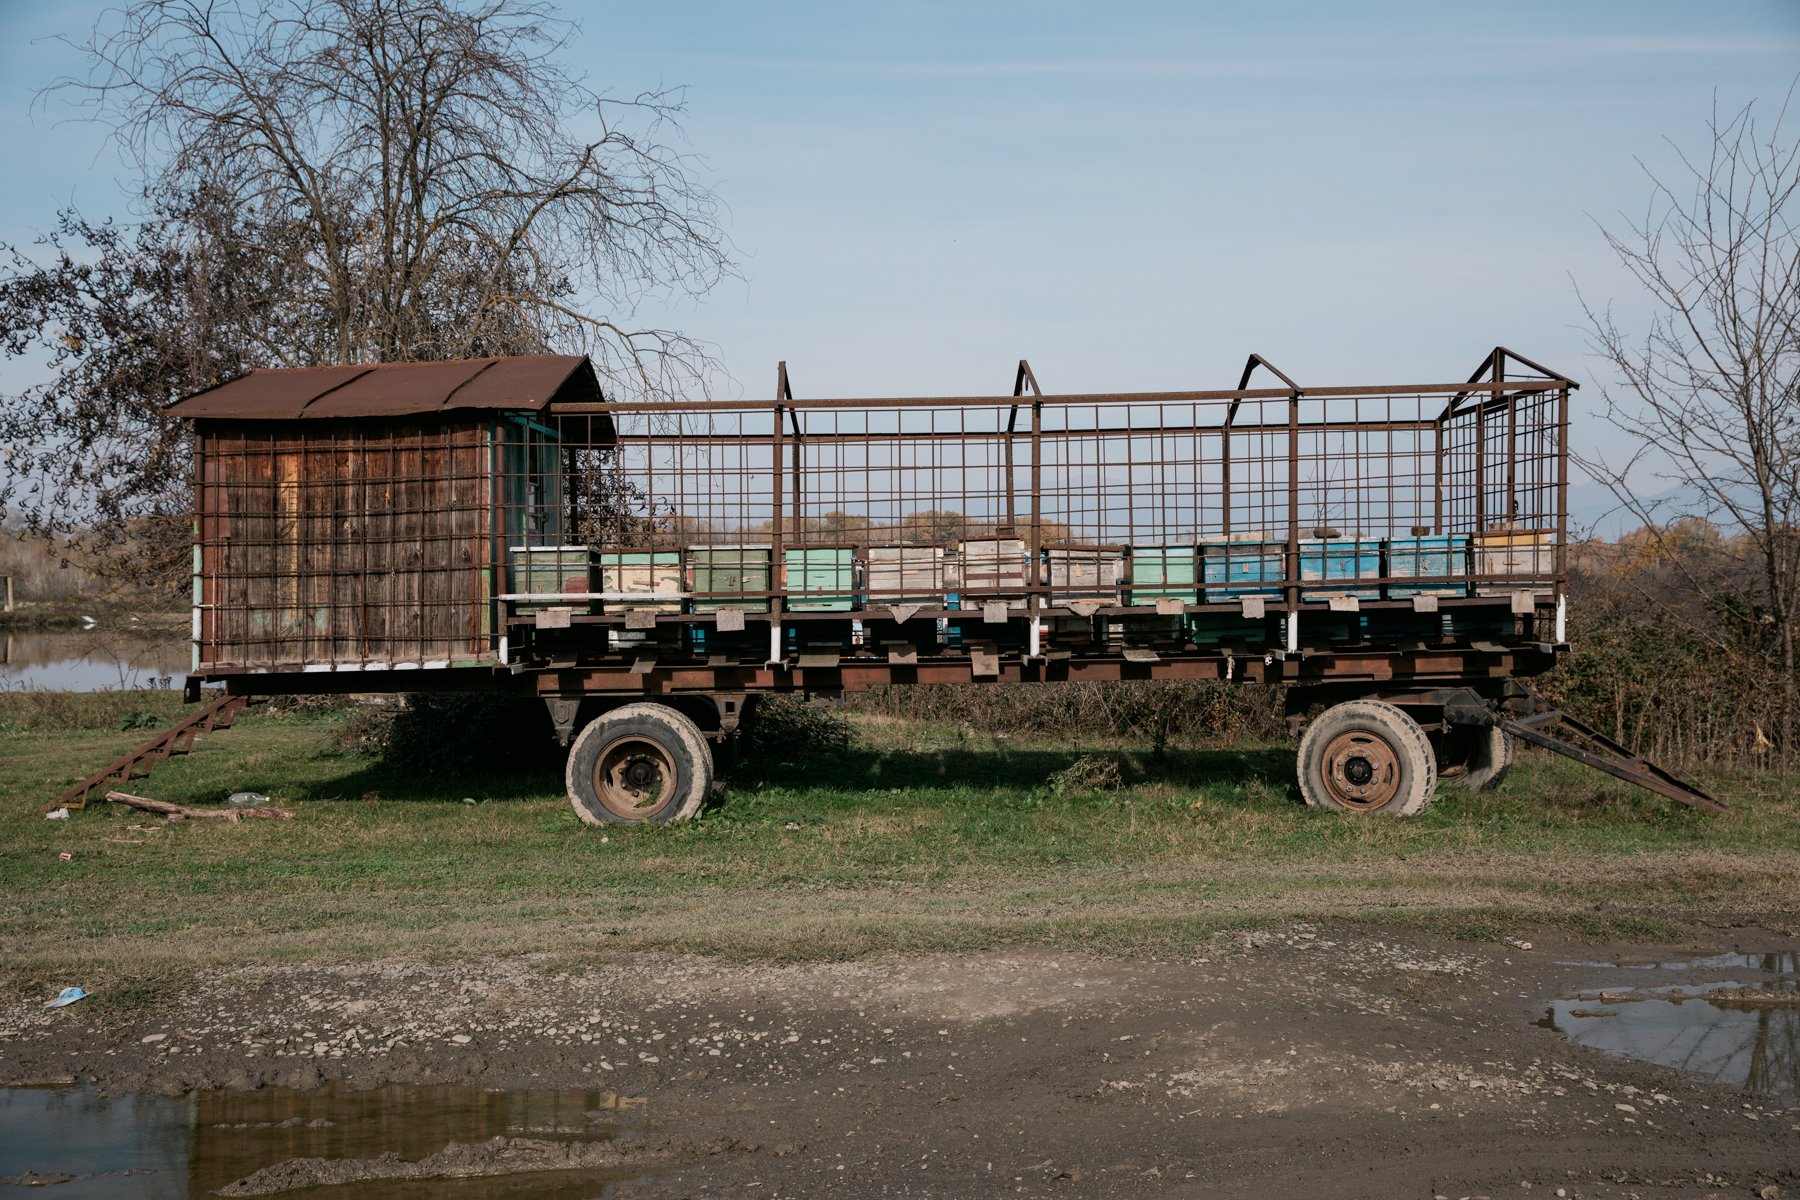  A trailer carrying beehives. Trailers like this are common in the Alazani Valley as their elevated height helps them navigate rough terrain. 